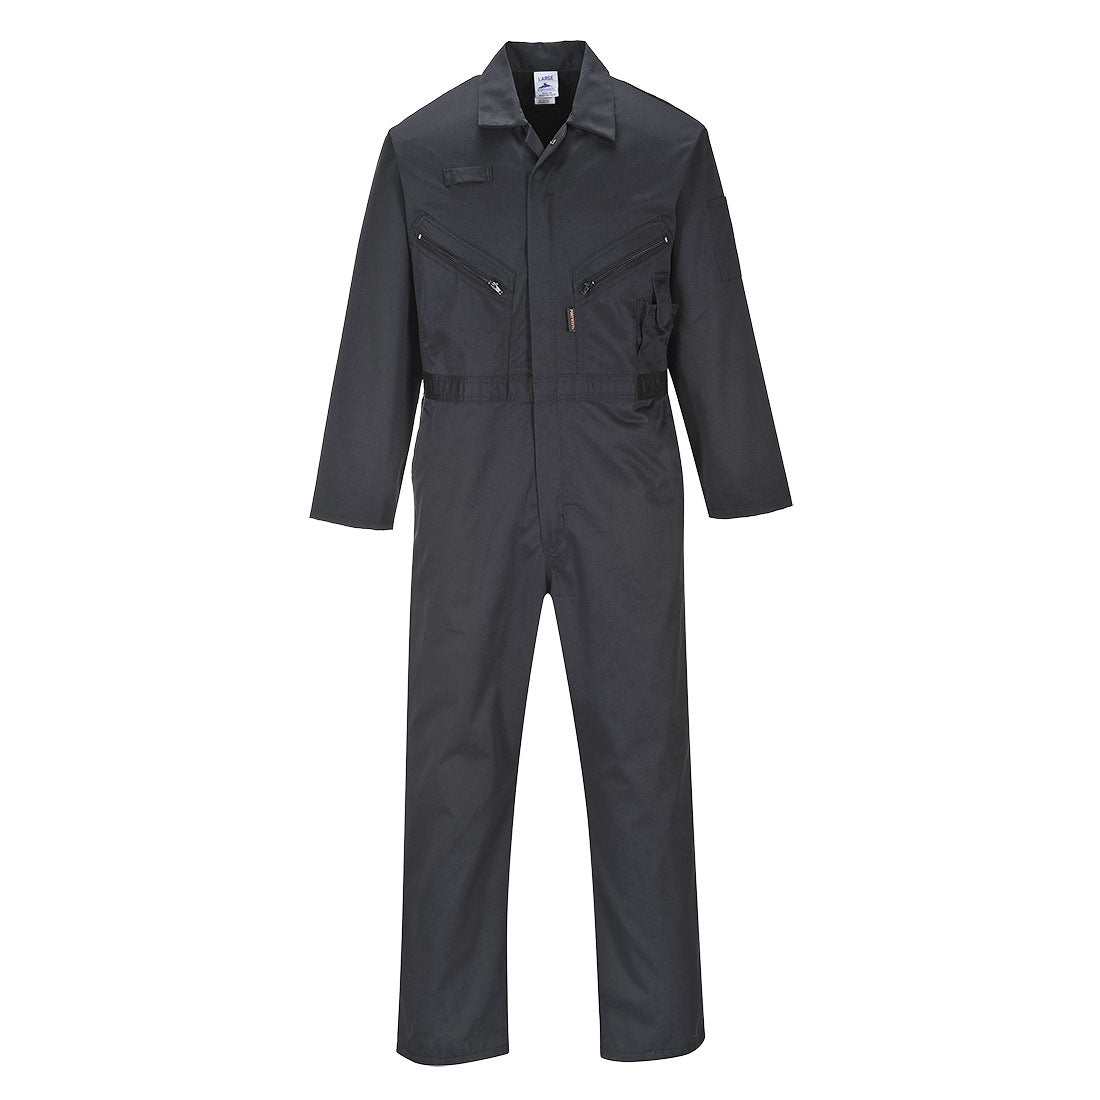 Portwest C813 Liverpool Zip Coverall for General Workwear